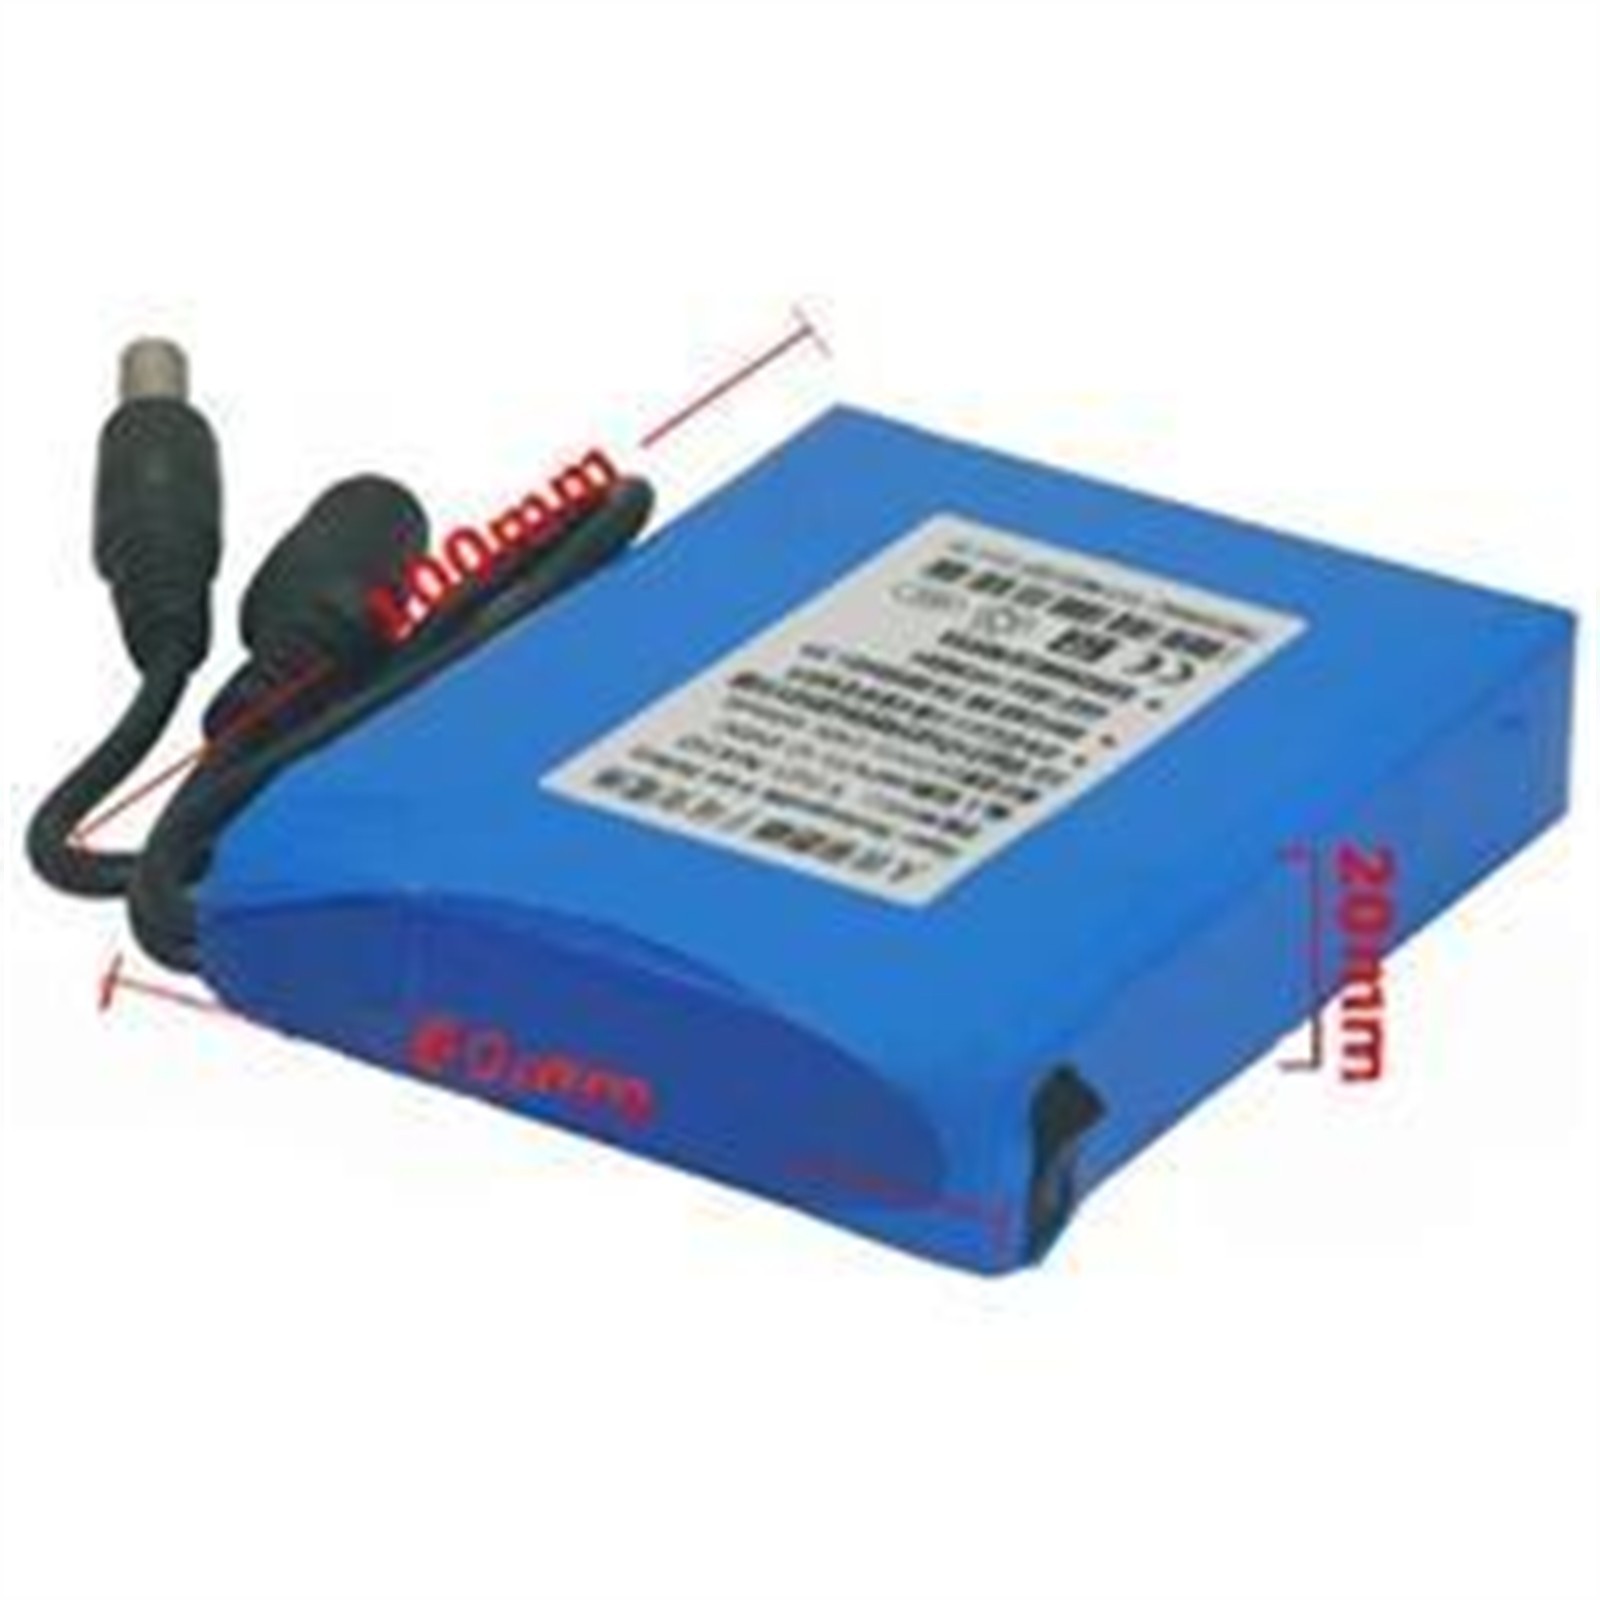 switched voltage 12VDC 1A 100-240VAC 50-60Hz cctv camera Power supply